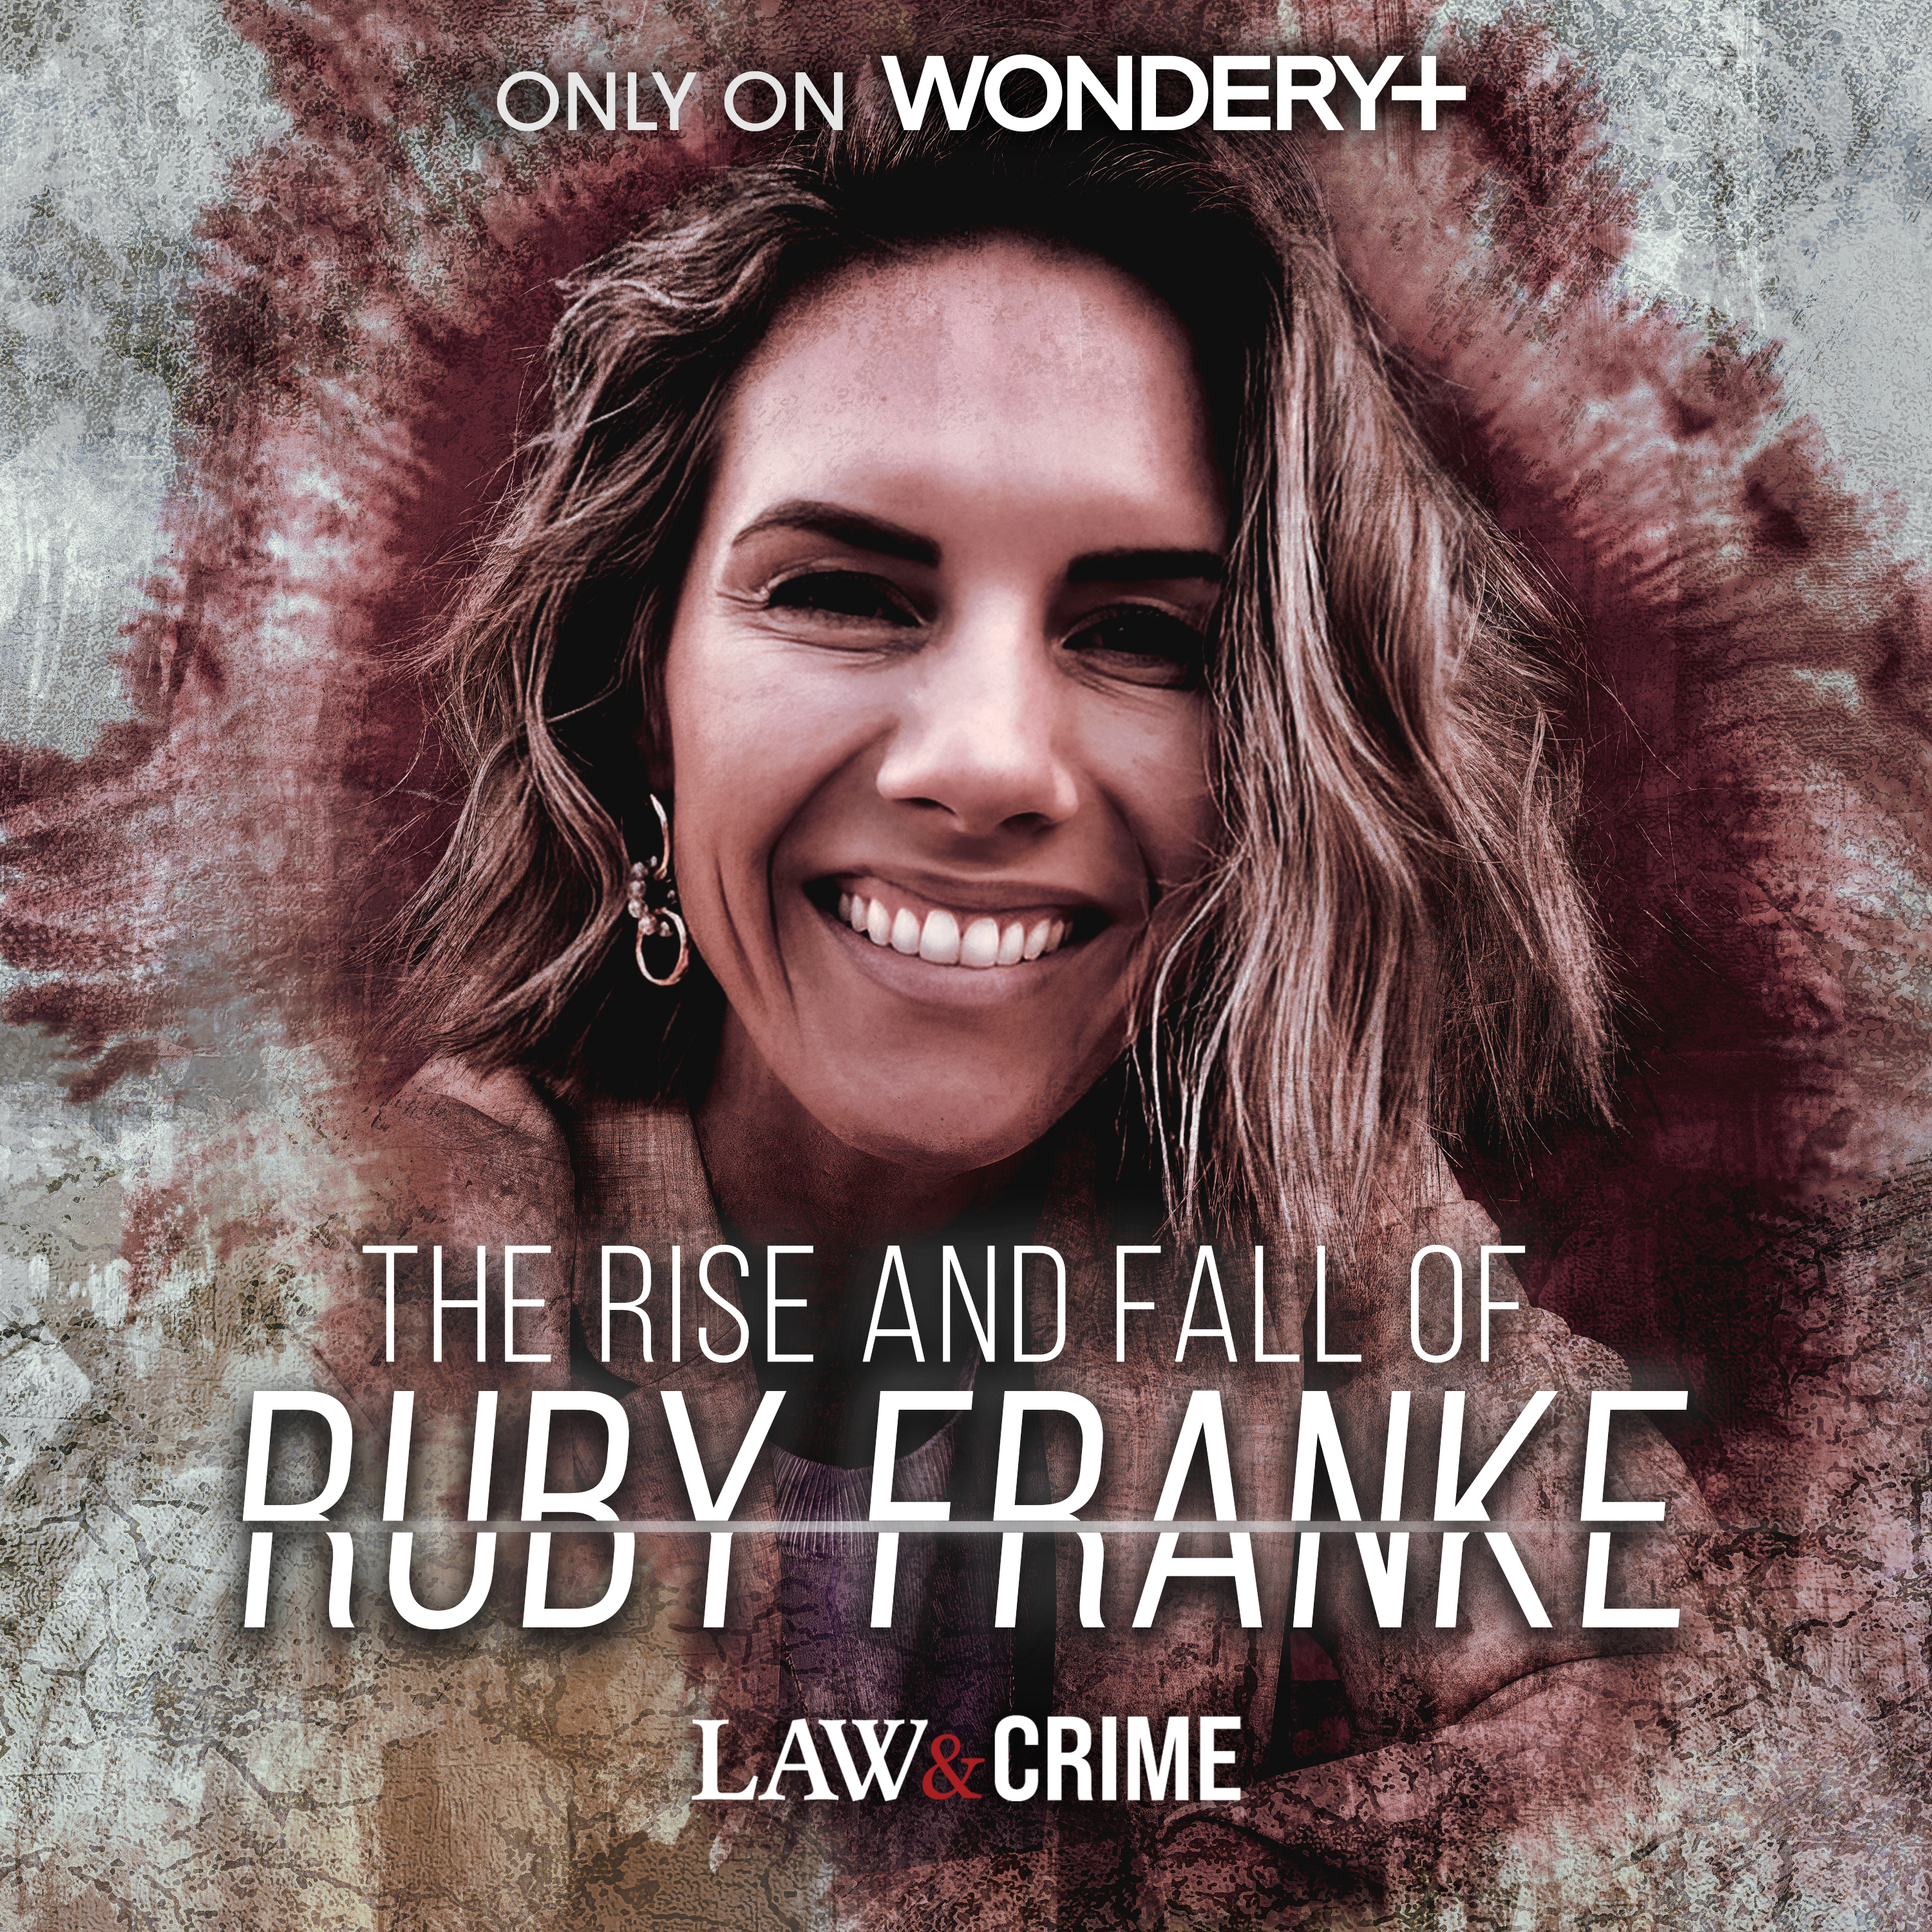 Meet the Frankes | 1 by Law&Crime | Wondery